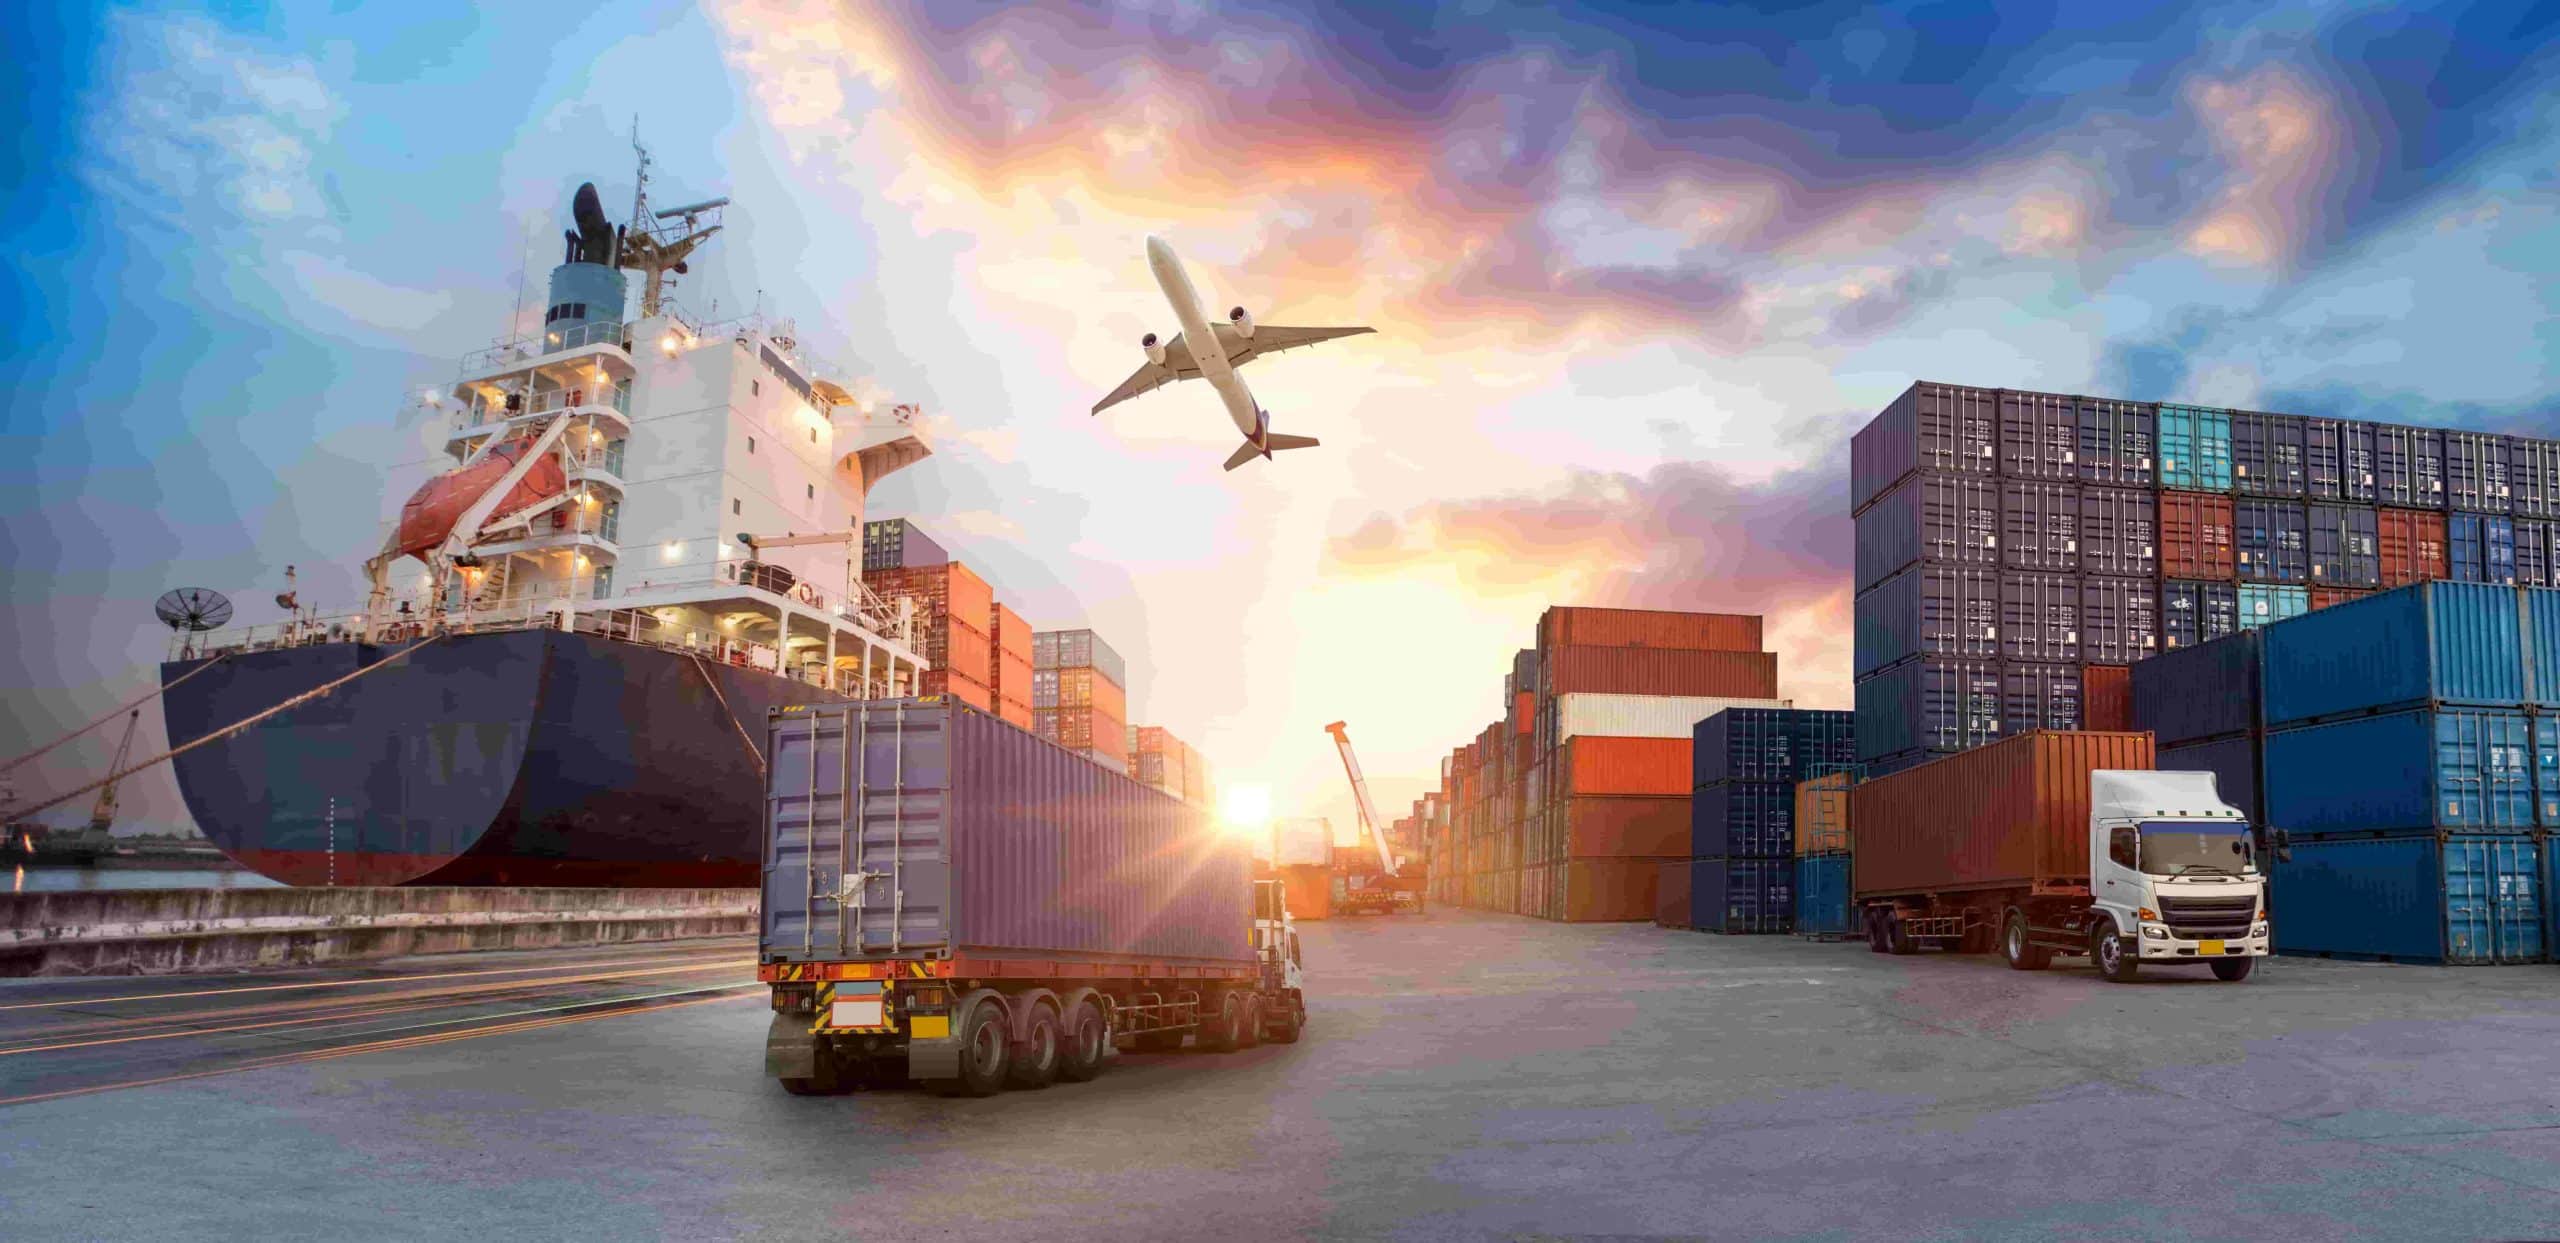 Economy vs Standard Shipping's Difference: Which Is Better?